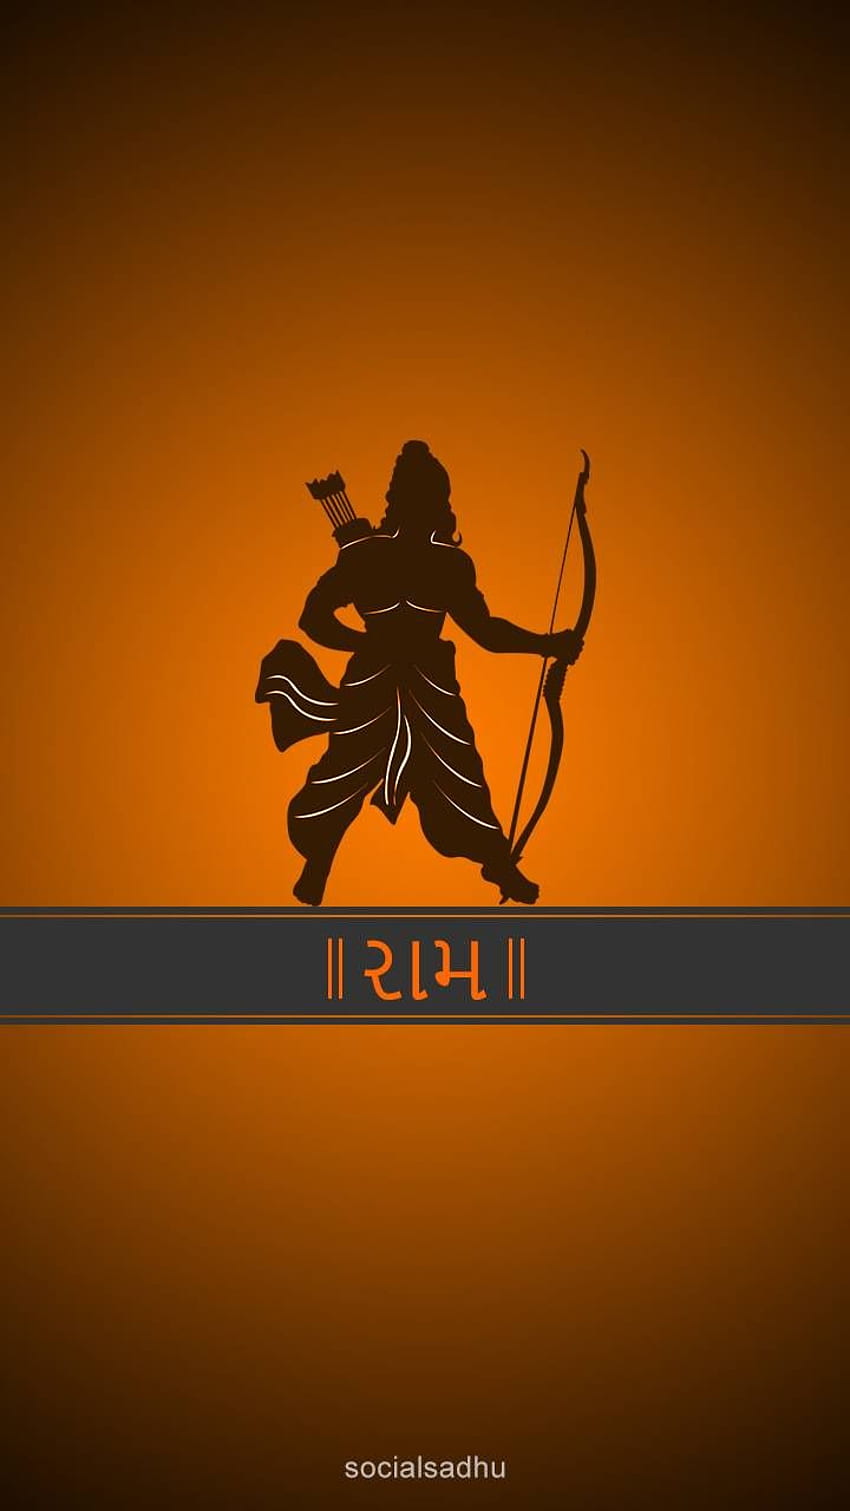 Shri Ram by socialsadhu - 23 now. Browse millions of popular lord ram Wallp. Shri ram , Shri ram , Ram , Yoddha: The Warrior HD phone wallpaper